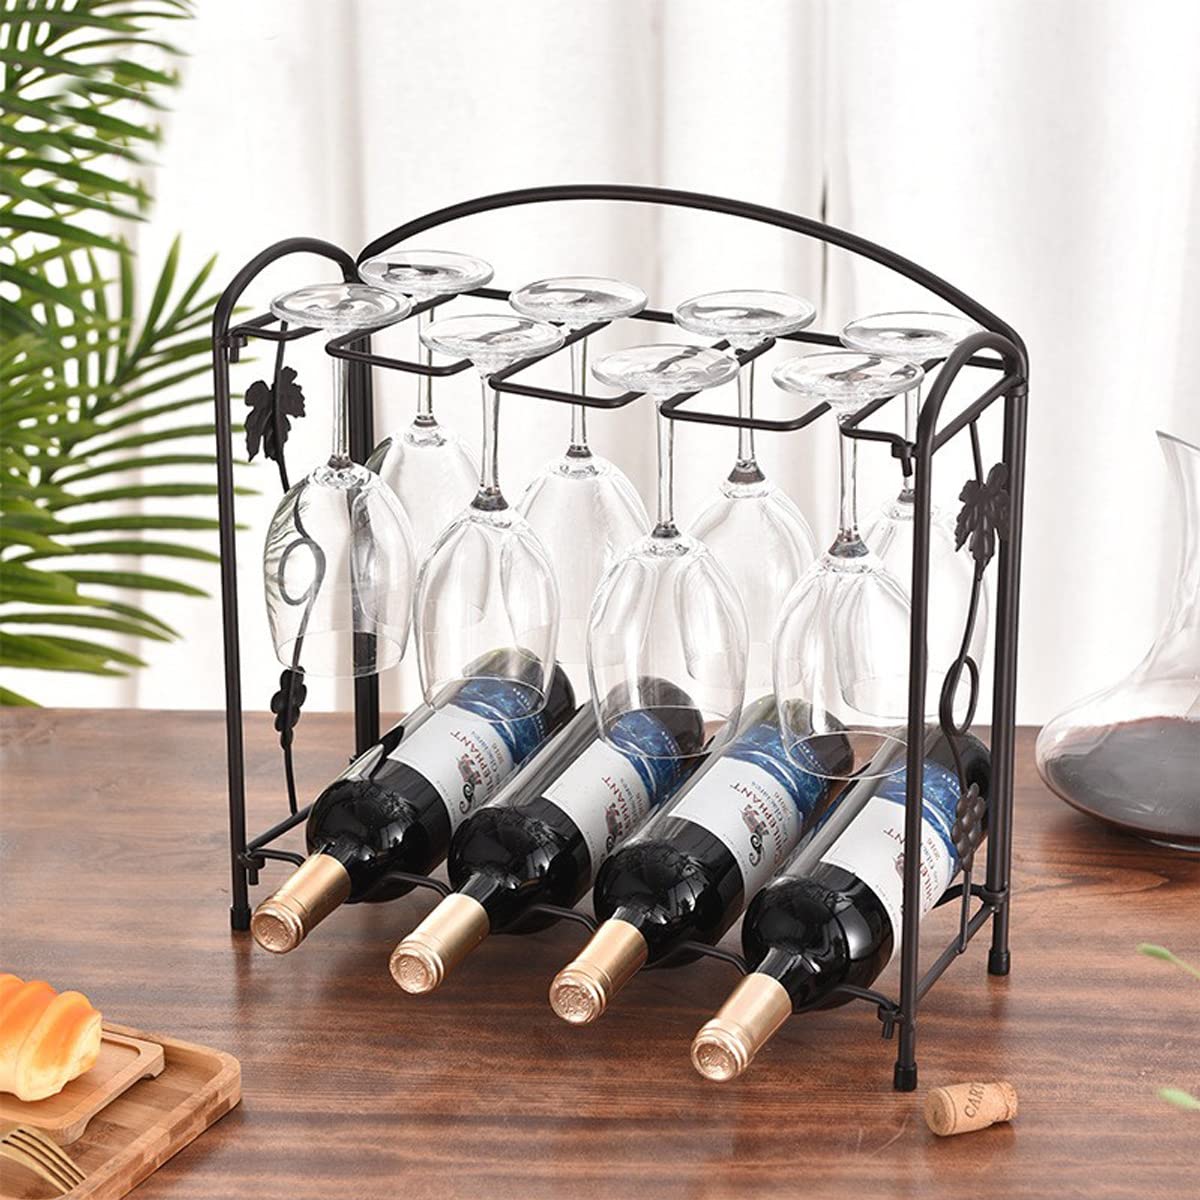 Countertop Wine Rack - Hold 4 Wine Bottles and 8 Glasses Multifunctional dis Assembly Small Wine Rack - 1 Tier Tabletop Wine Holder Stand for Cabinet, Pantry, Wine Bottle Storage